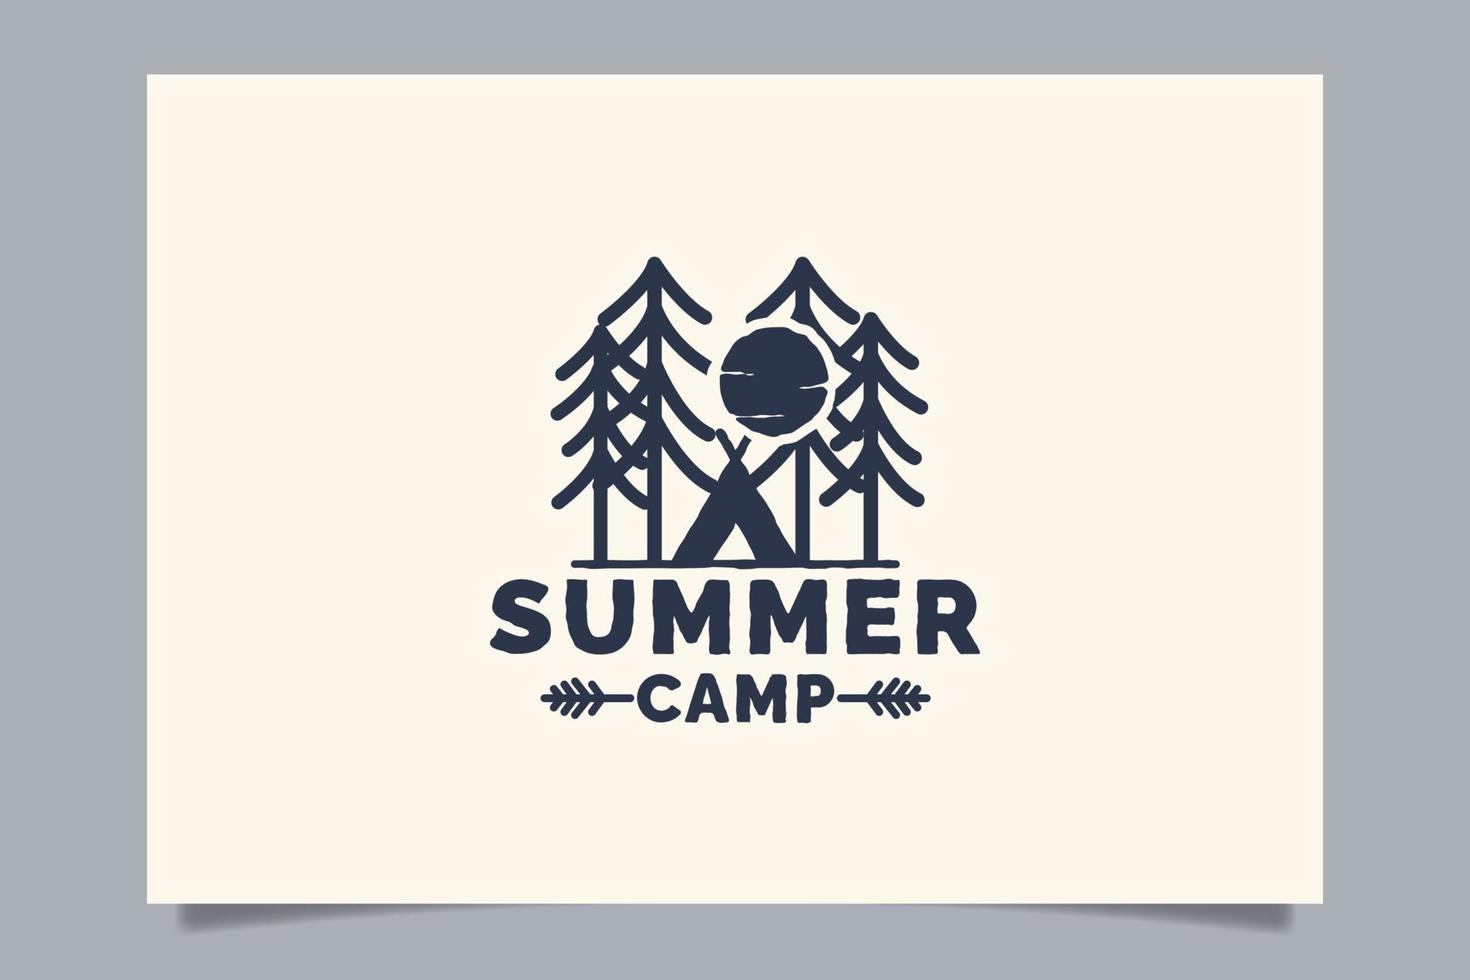 summer camp logo for any business especially for outdoor activity, summer holiday, sport, adventure, etc. vector